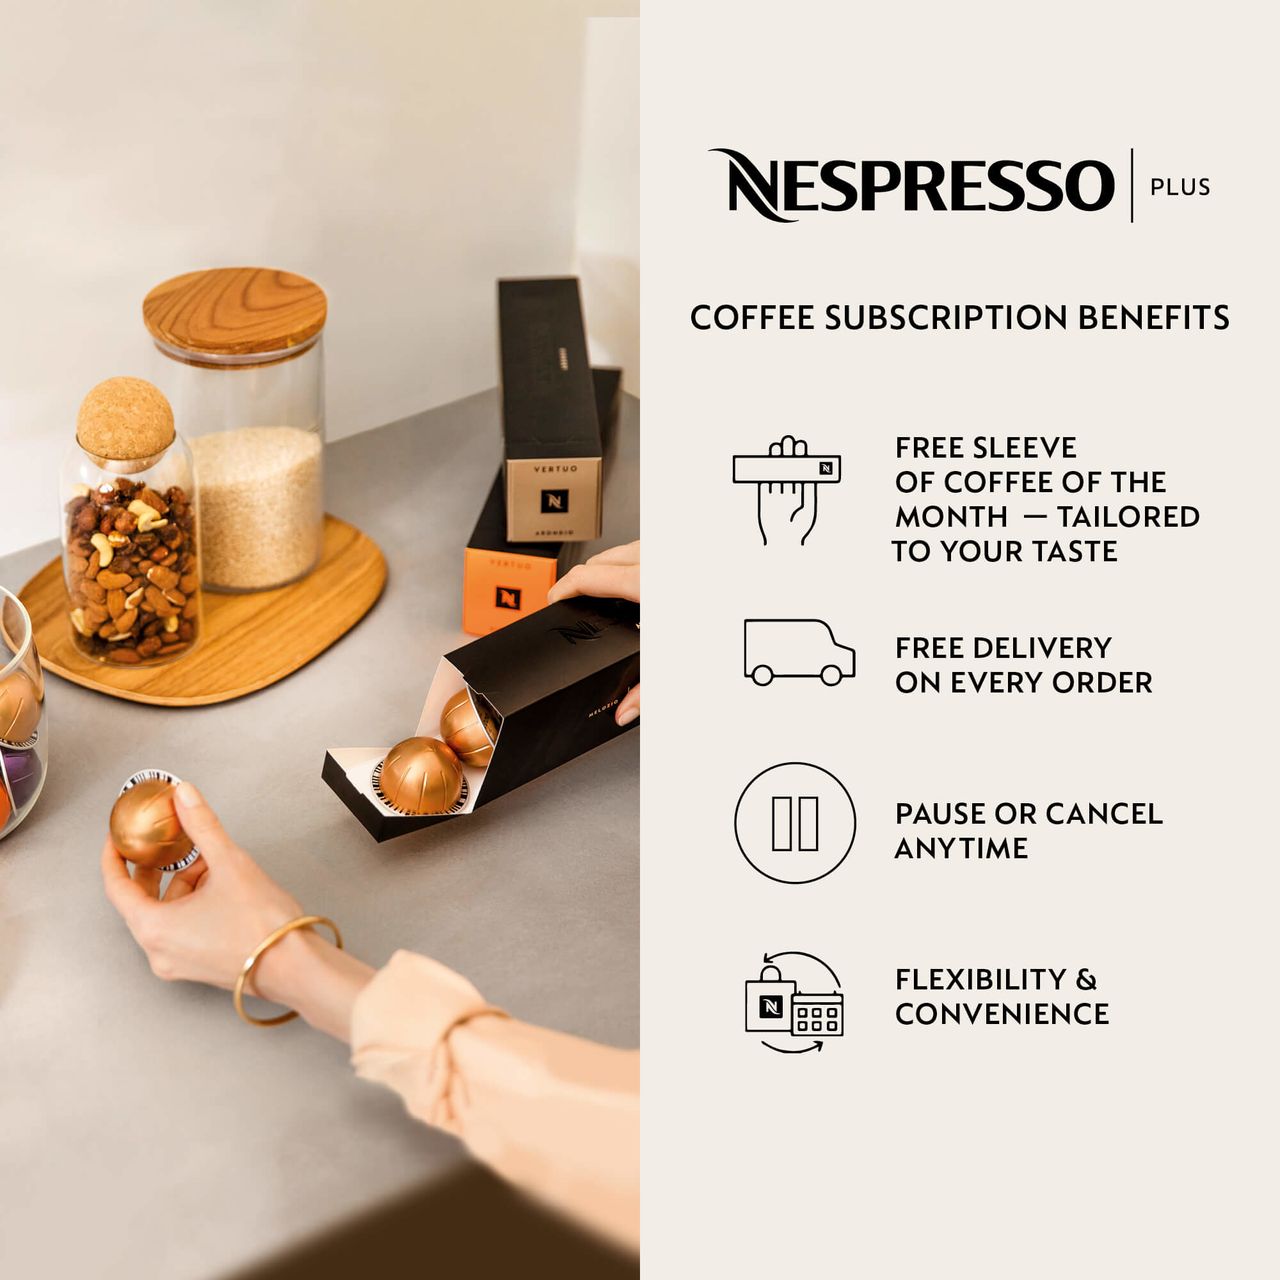 50 NESPRESSO VERTUO CAPSULES CHOOSE YOUR FAVES. ORDER TODAY FOR QUICK  DELIVERY